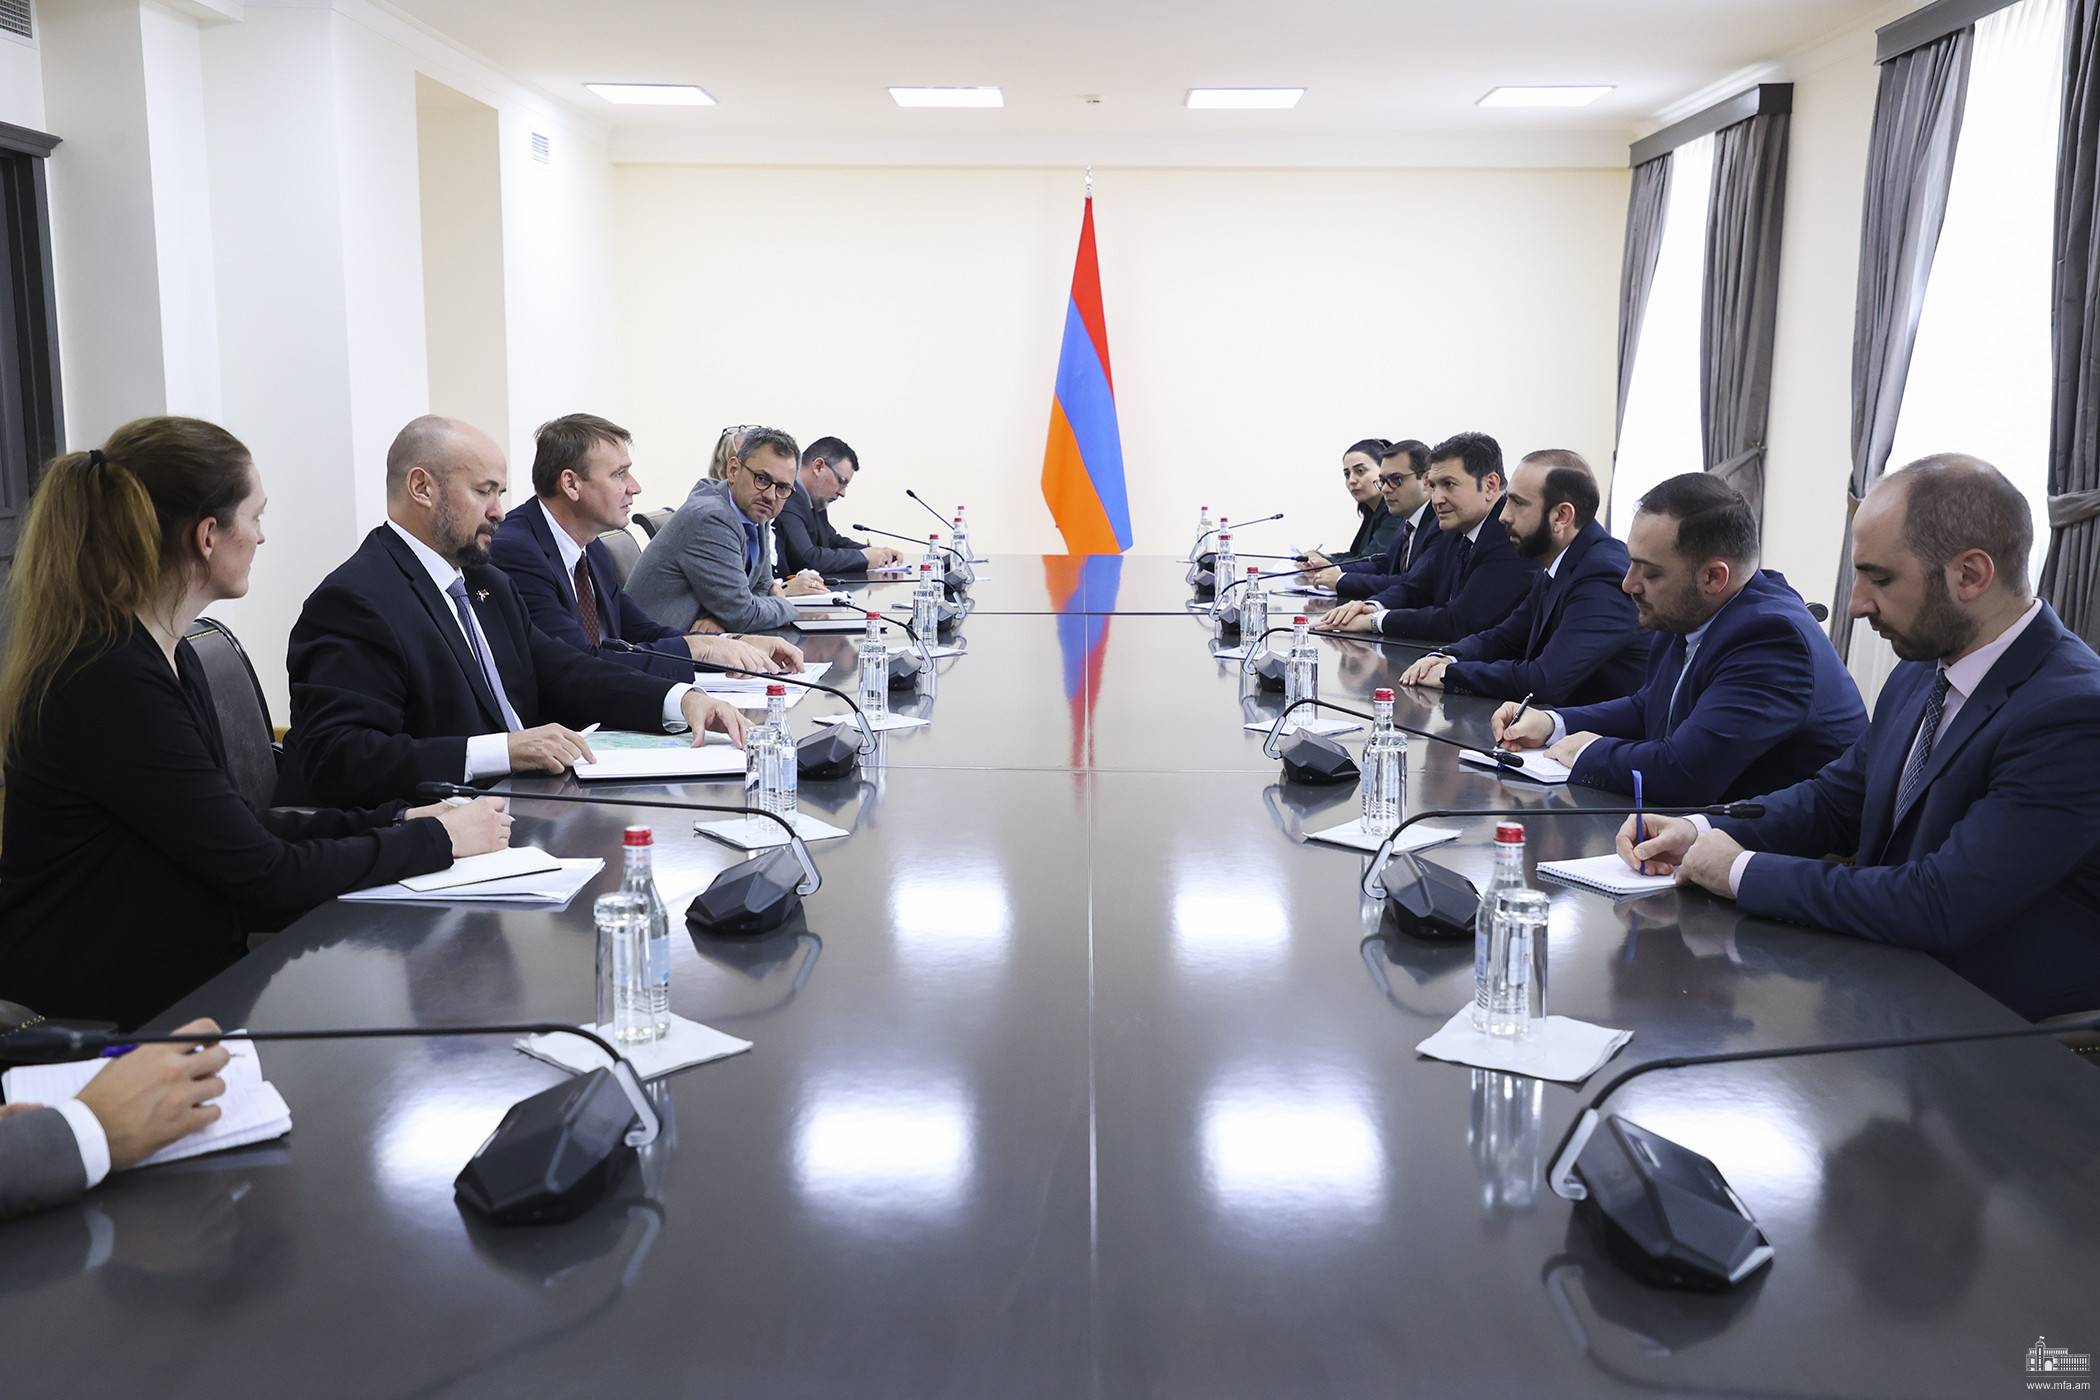 Foreign Minister of Armenia received the members of the EU technical assessment mission